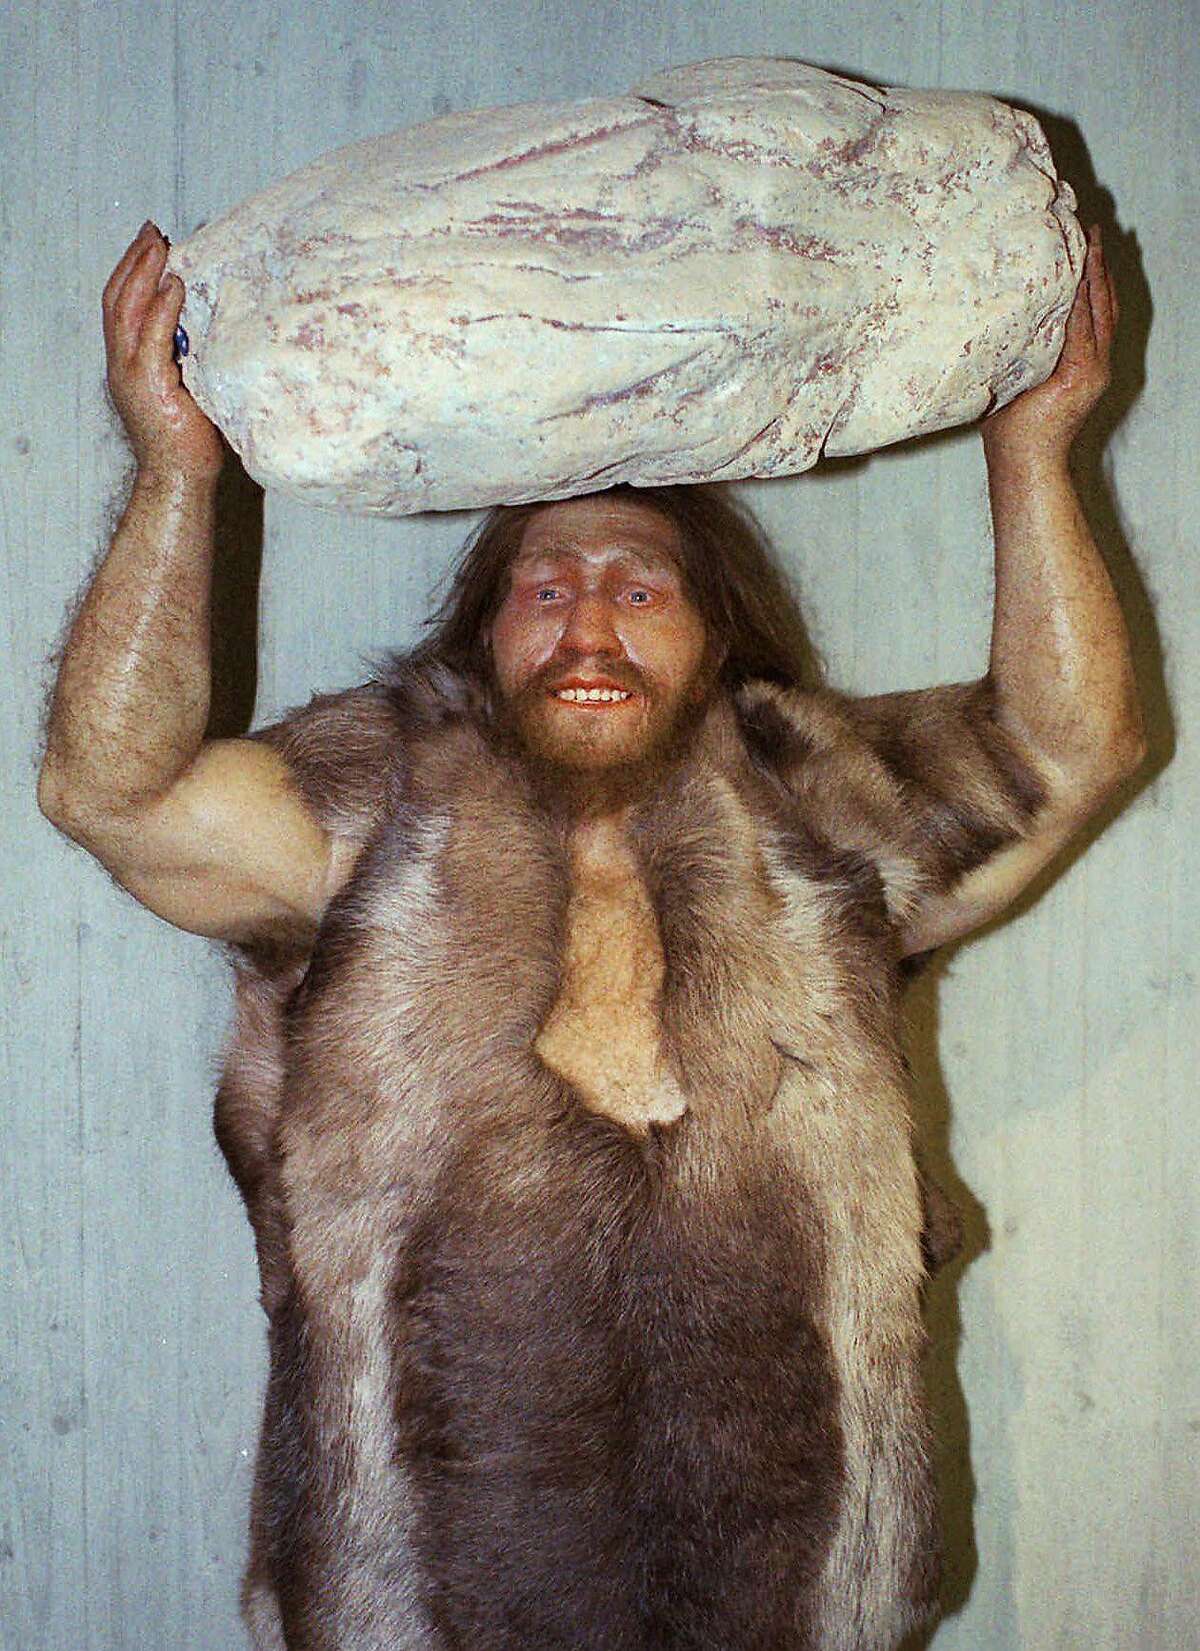 FILE - This Oct. 1996 file photo shows a replica of a Neanderthal man at the Neanderthal museum in Mettmann, western Germany. Next time you call someone a Neanderthal, better look in a mirror. Much of the genes that help determine most people’s skin and hair are much more Neanderthal than not, according to two new studies that look at the DNA fossils hidden in the modern human genome. Scientists isolated the parts of the non-African modern human genetic blueprint that still contain Neanderthal remnants. Barely more than 1 percent comes from 50,000 years ago when modern humans leaving Africa mated with the soon-to-be-extinct Neanderthals. (AP Photo/Heinz Ducklau, File)